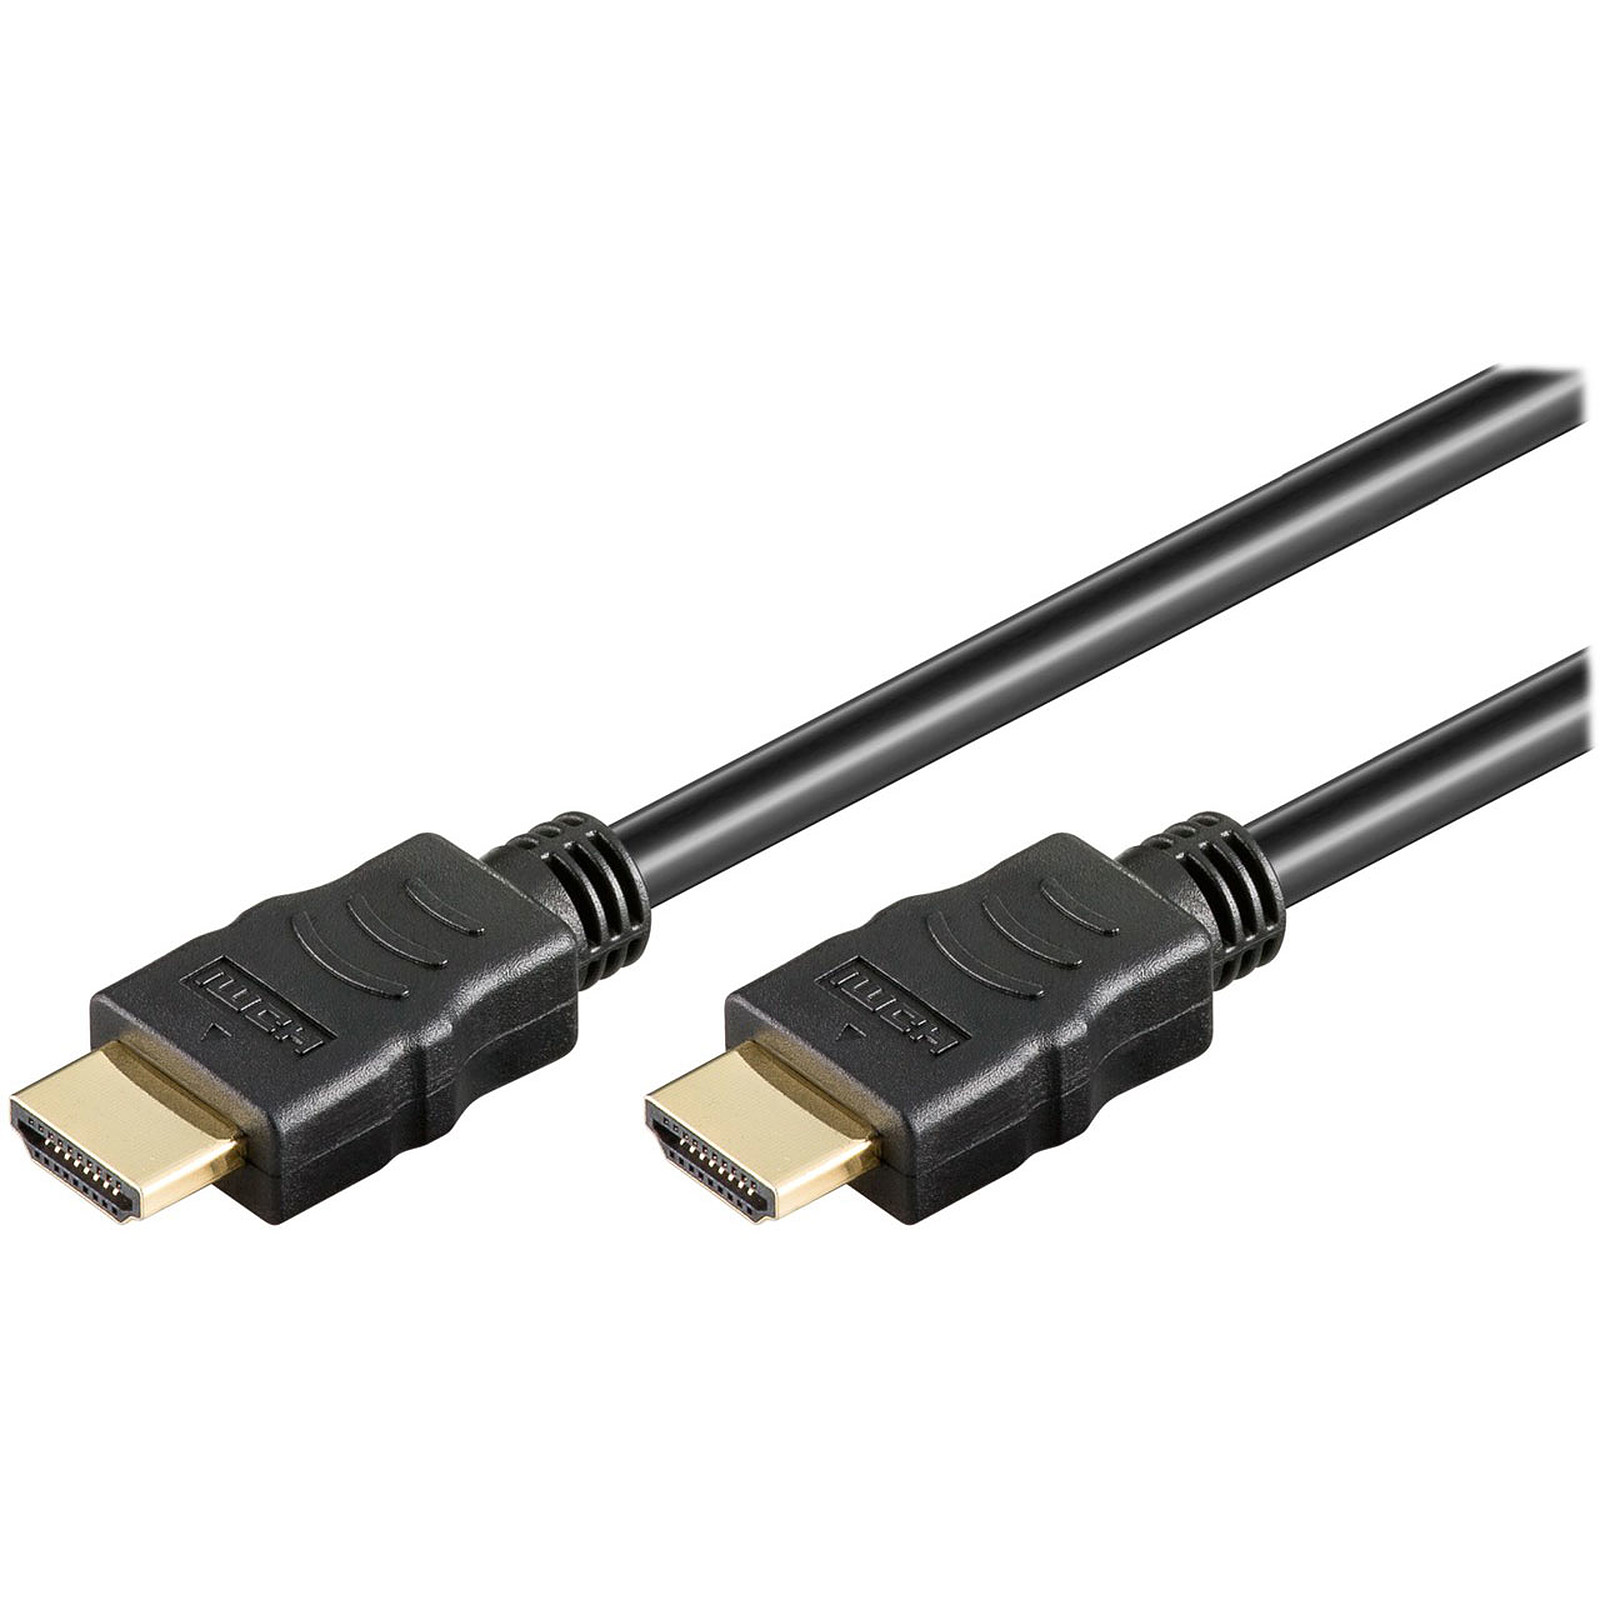 Goobay High Speed HDMI Cable with Ethernet (1.5 m) - HDMI Goobay